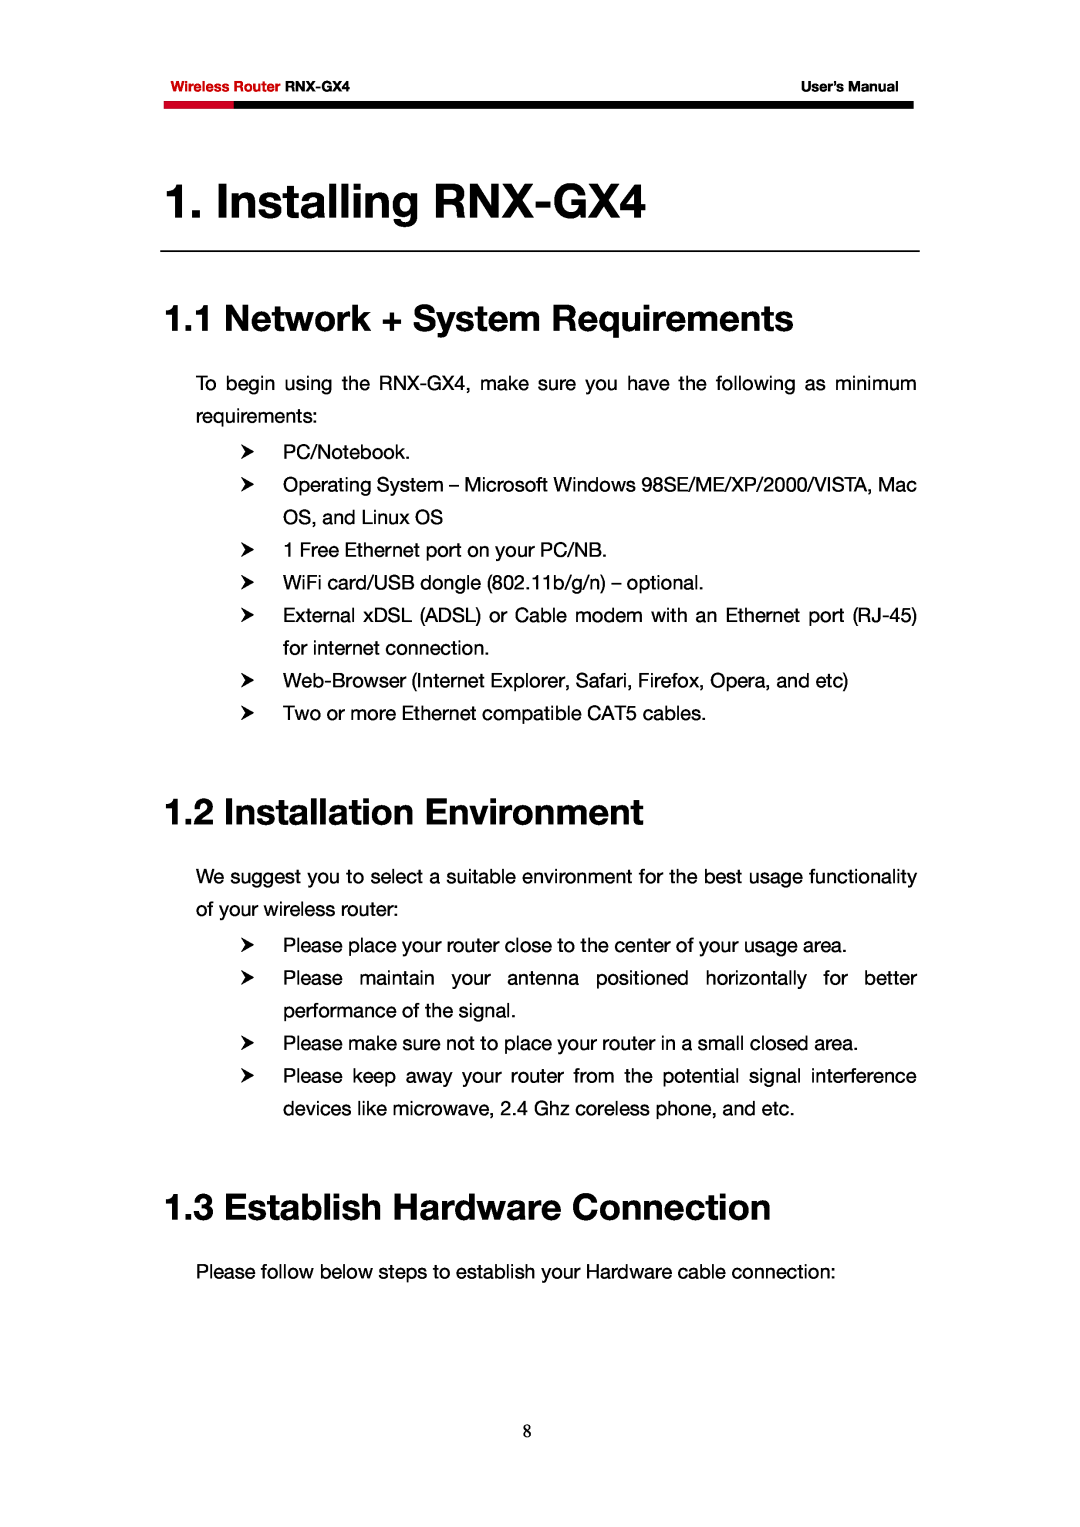 Rosewill Installing RNX-GX4, Network + System Requirements, Installation Environment, Establish Hardware Connection 